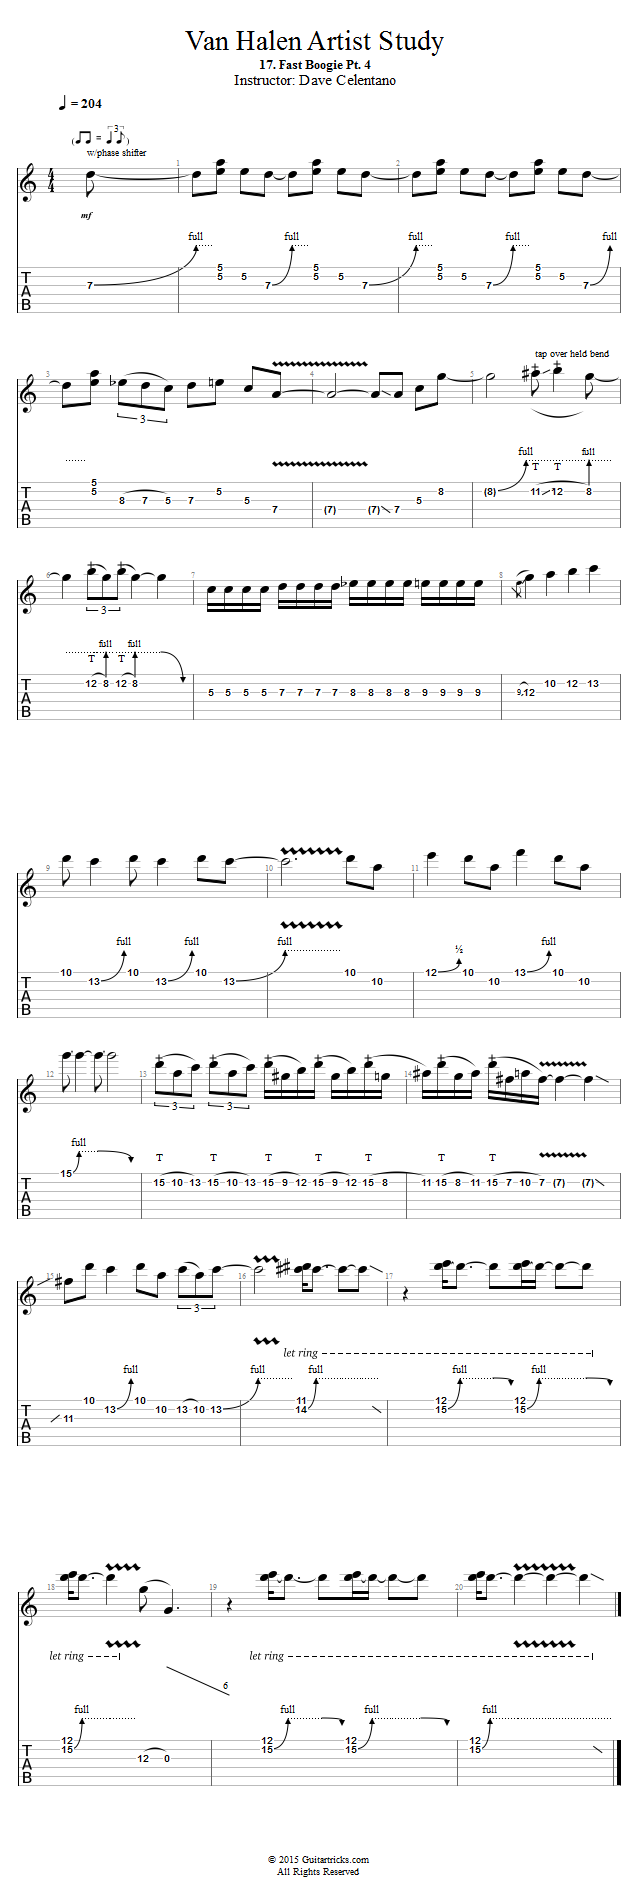 Fast Boogie Pt. 4 song notation